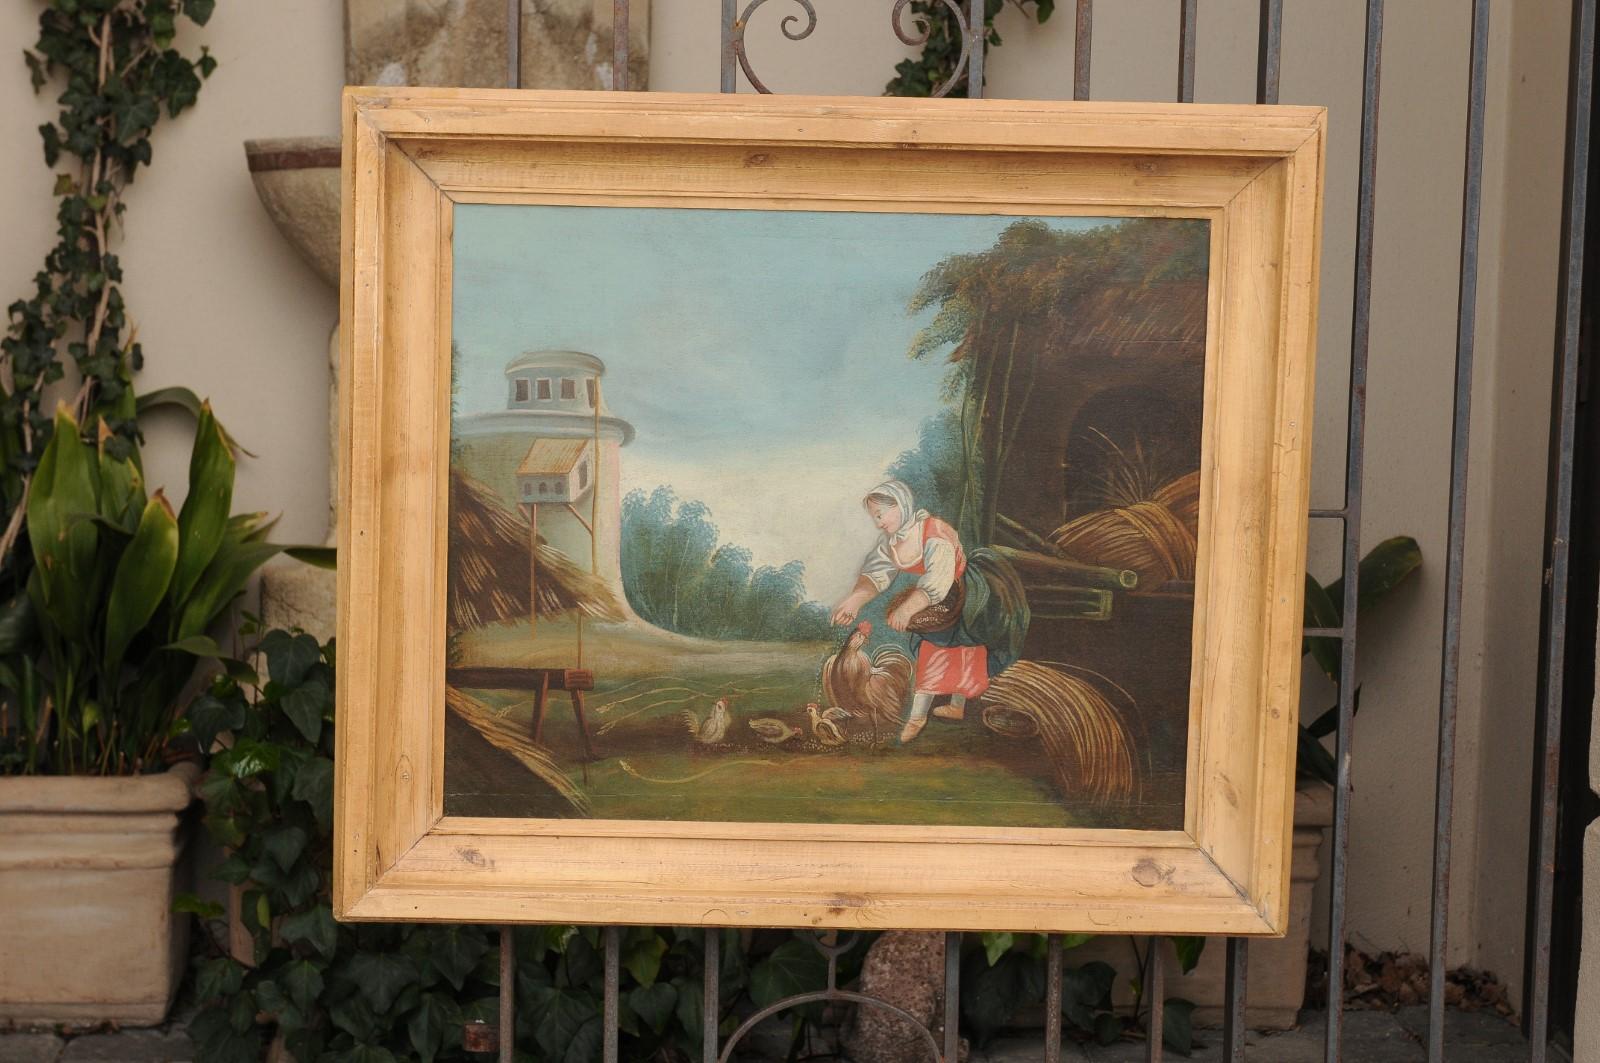 A French oil on canvas country scene from the late 18th century, set inside a pine frame. Born in France during the later years of Louis XVI's reign, this charming scene depicts a farmer feeding her chickens. The subtle use of curving lines leads